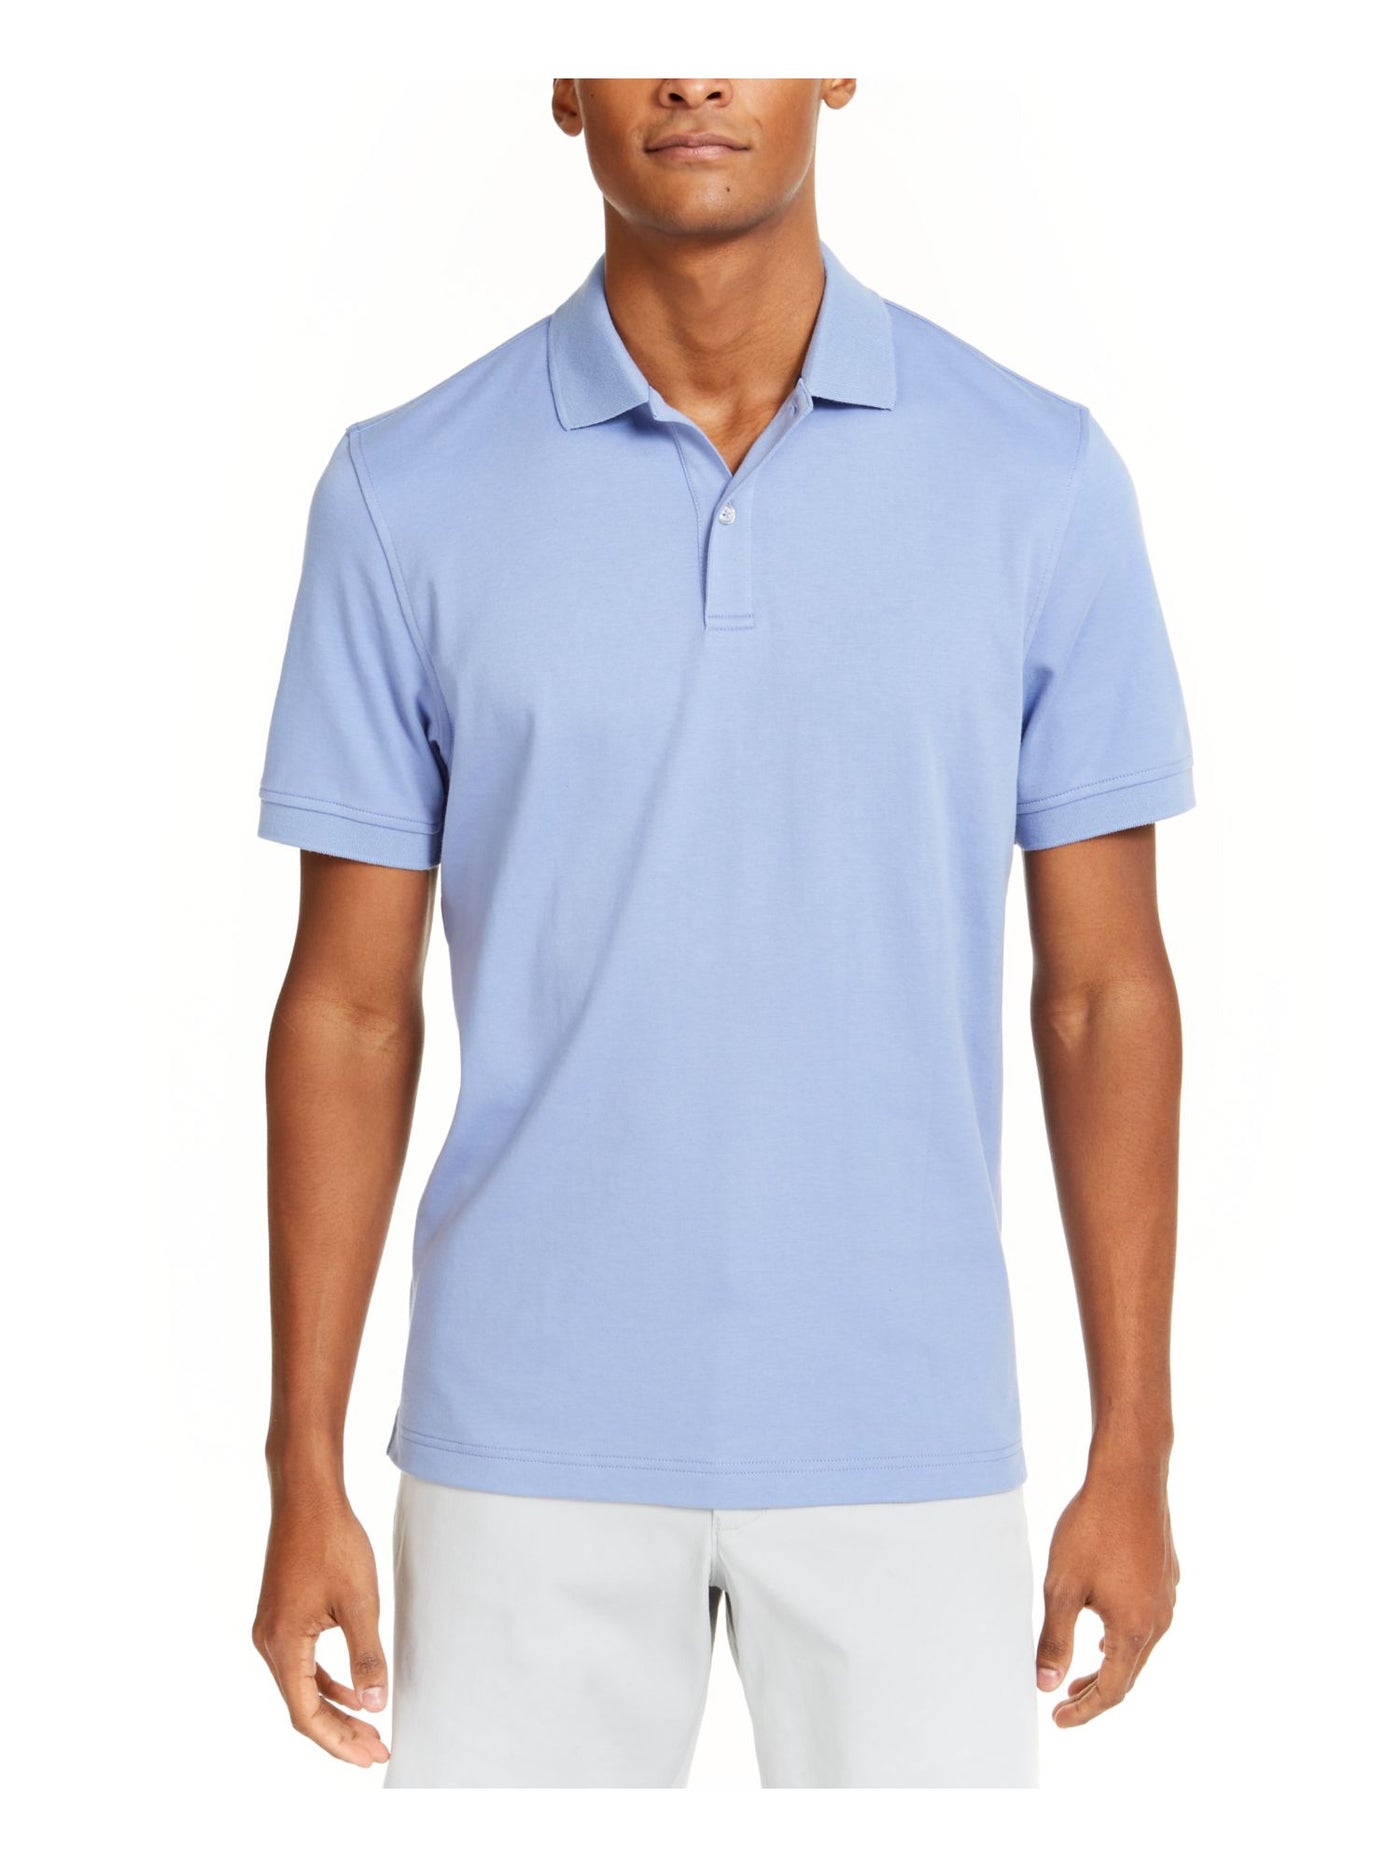 CLUBROOM Mens Light Blue Classic Fit Polo S